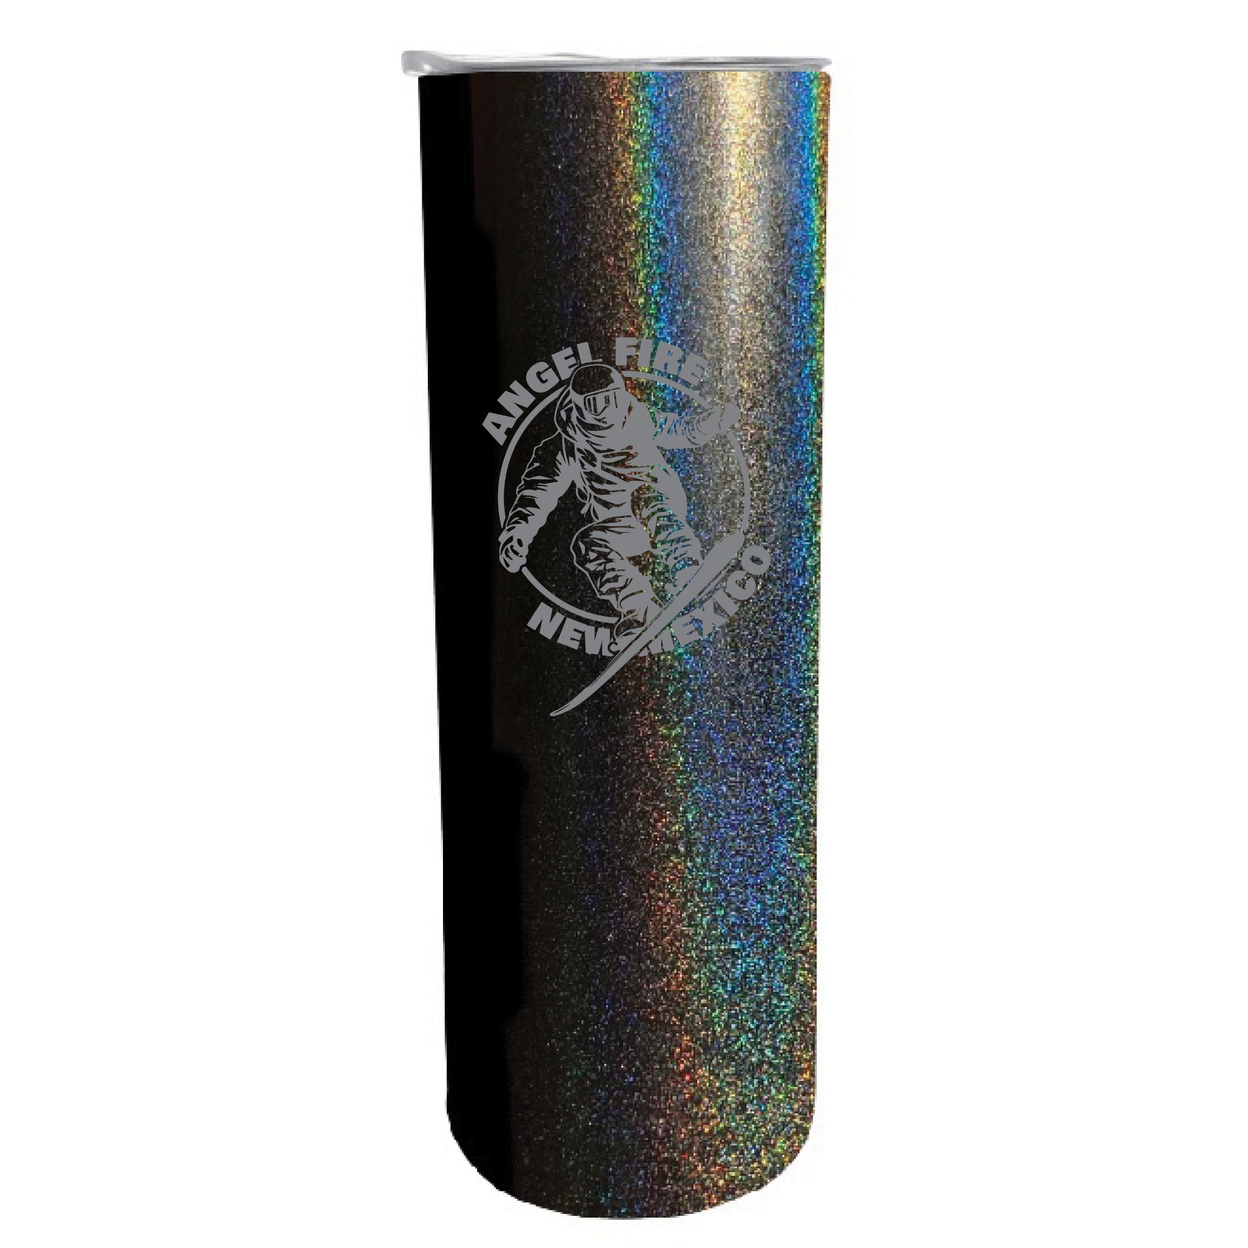 Angel Fire New Mexico Souvenir 20 Oz Engraved Insulated Stainless Steel Skinny Tumbler - Black Glitter,,2-Pack